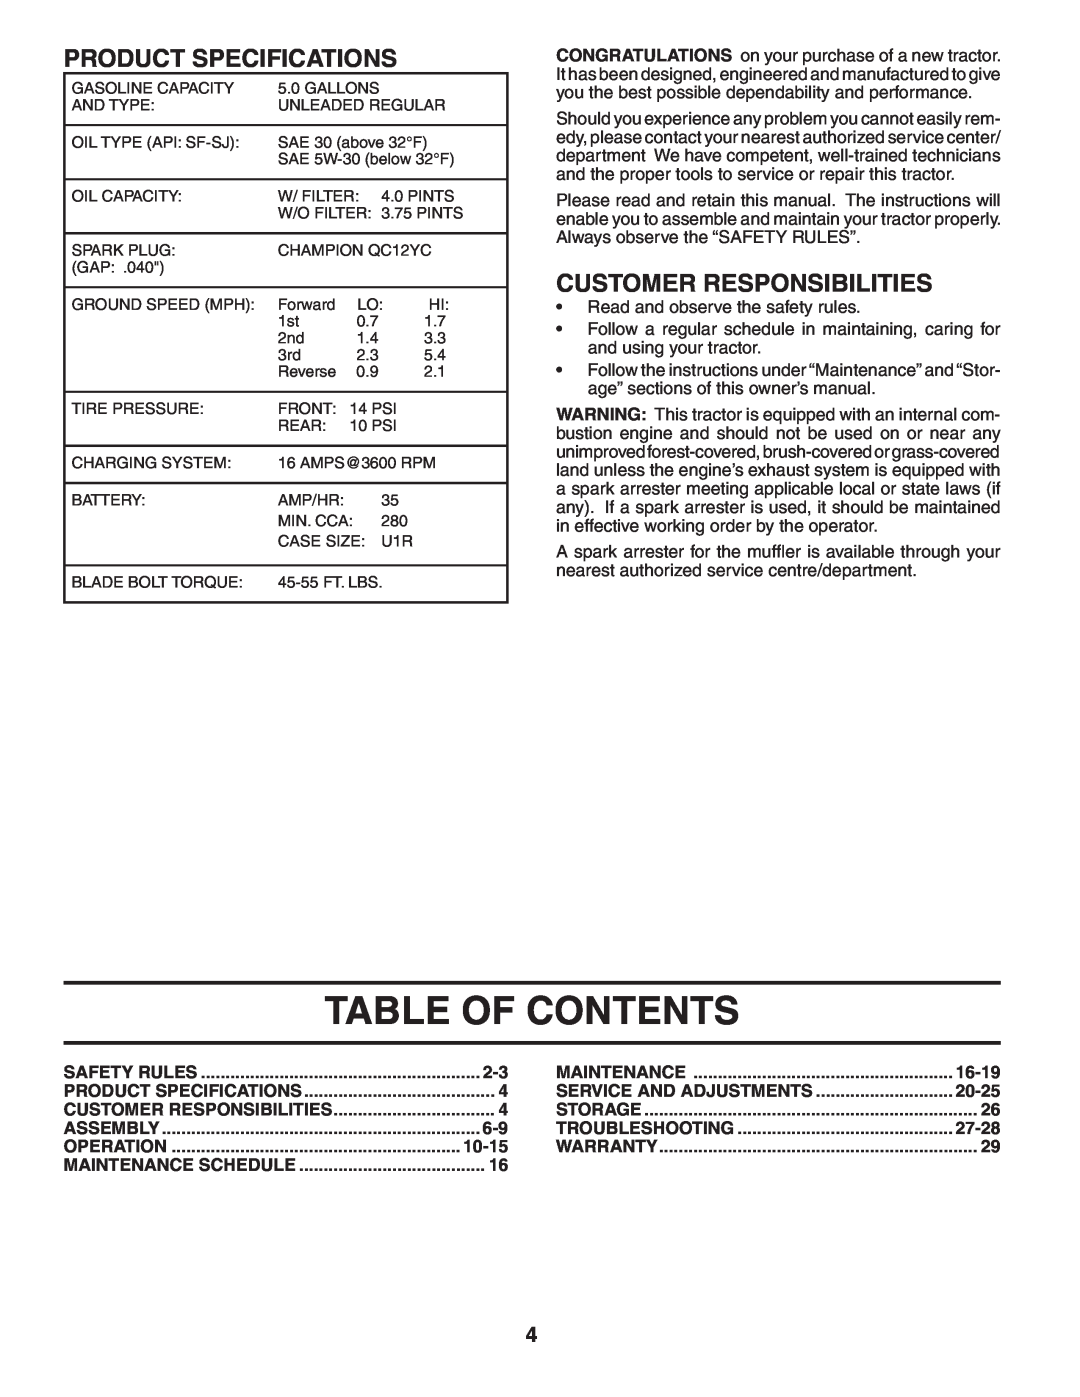 Poulan 194604 manual Table Of Contents, Product Specifications, Customer Responsibilities 